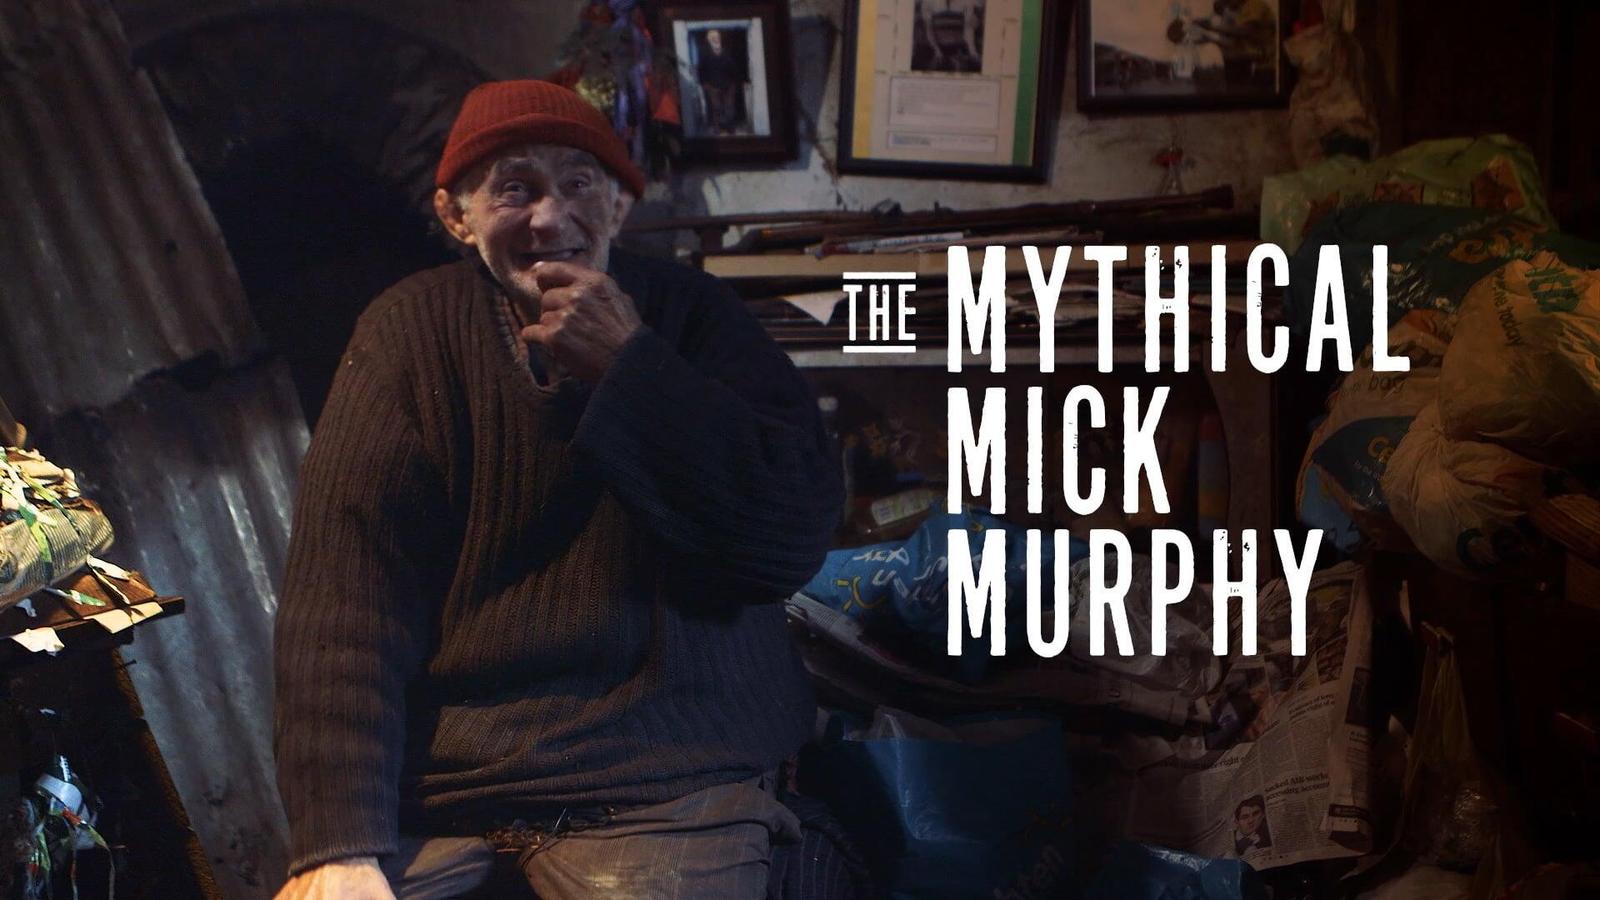 The Mythical Mick Murphy